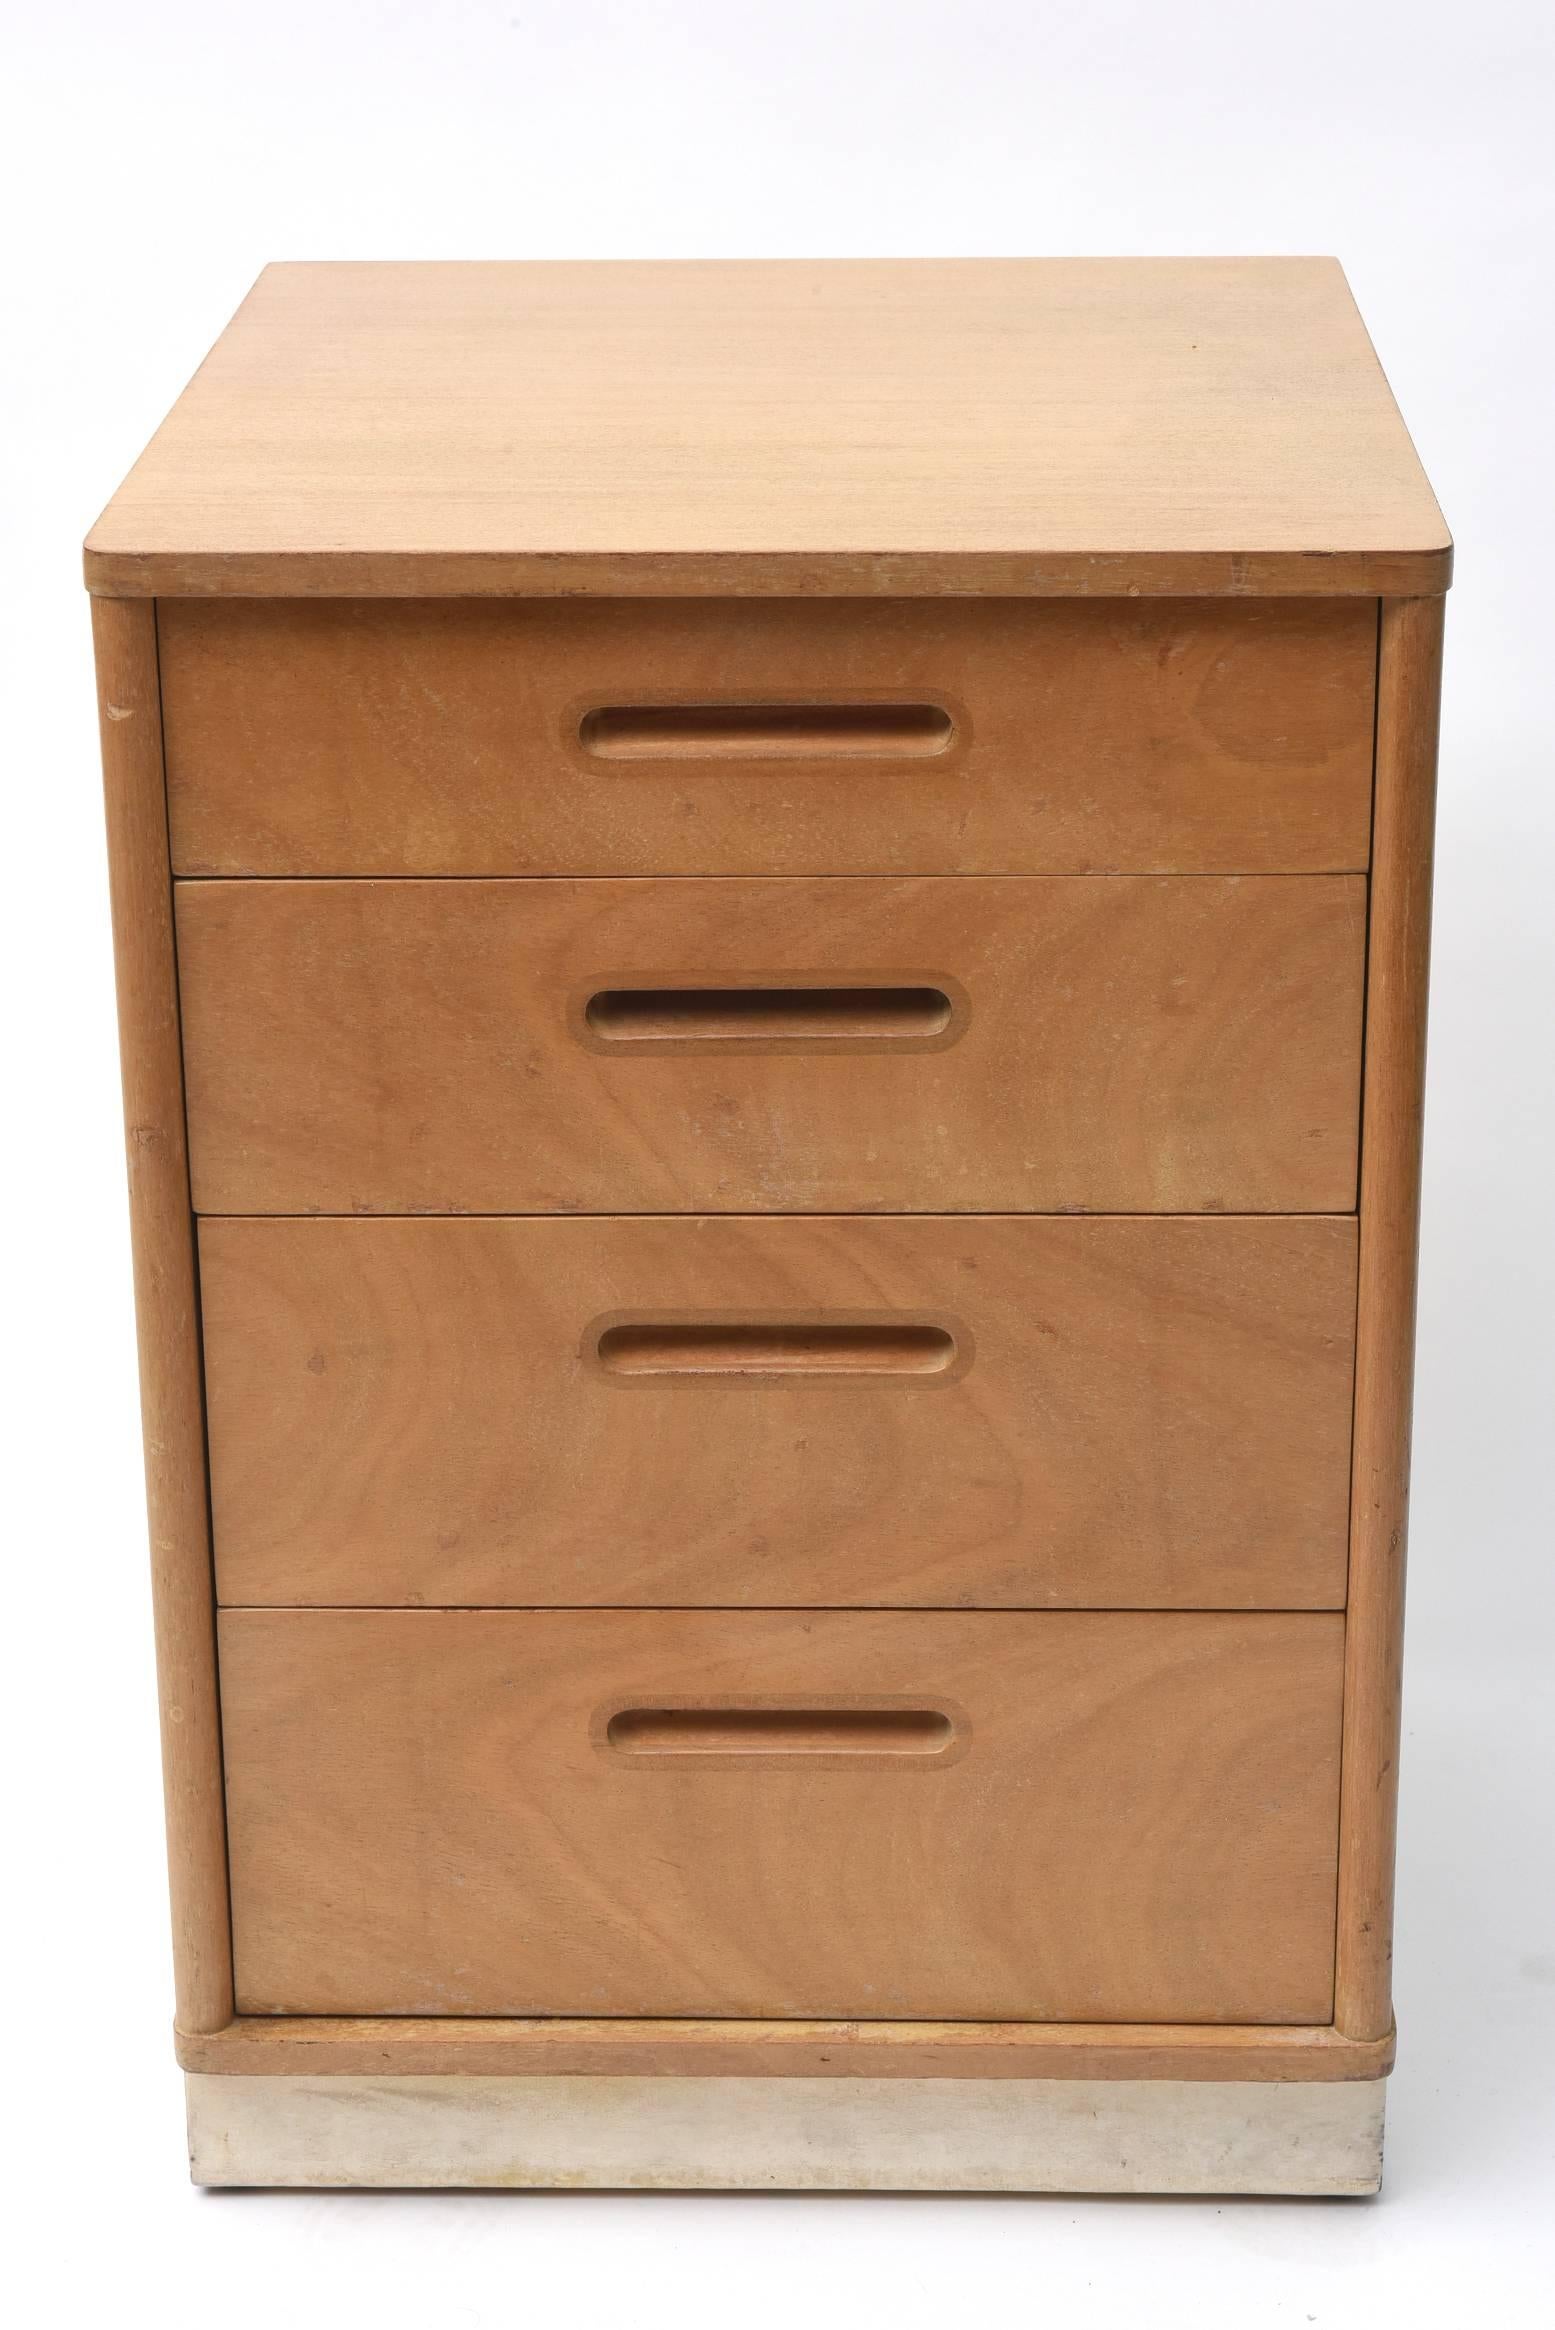 Edward Wormley nightstands or chest of drawers.
Manufactured by Dunbar.